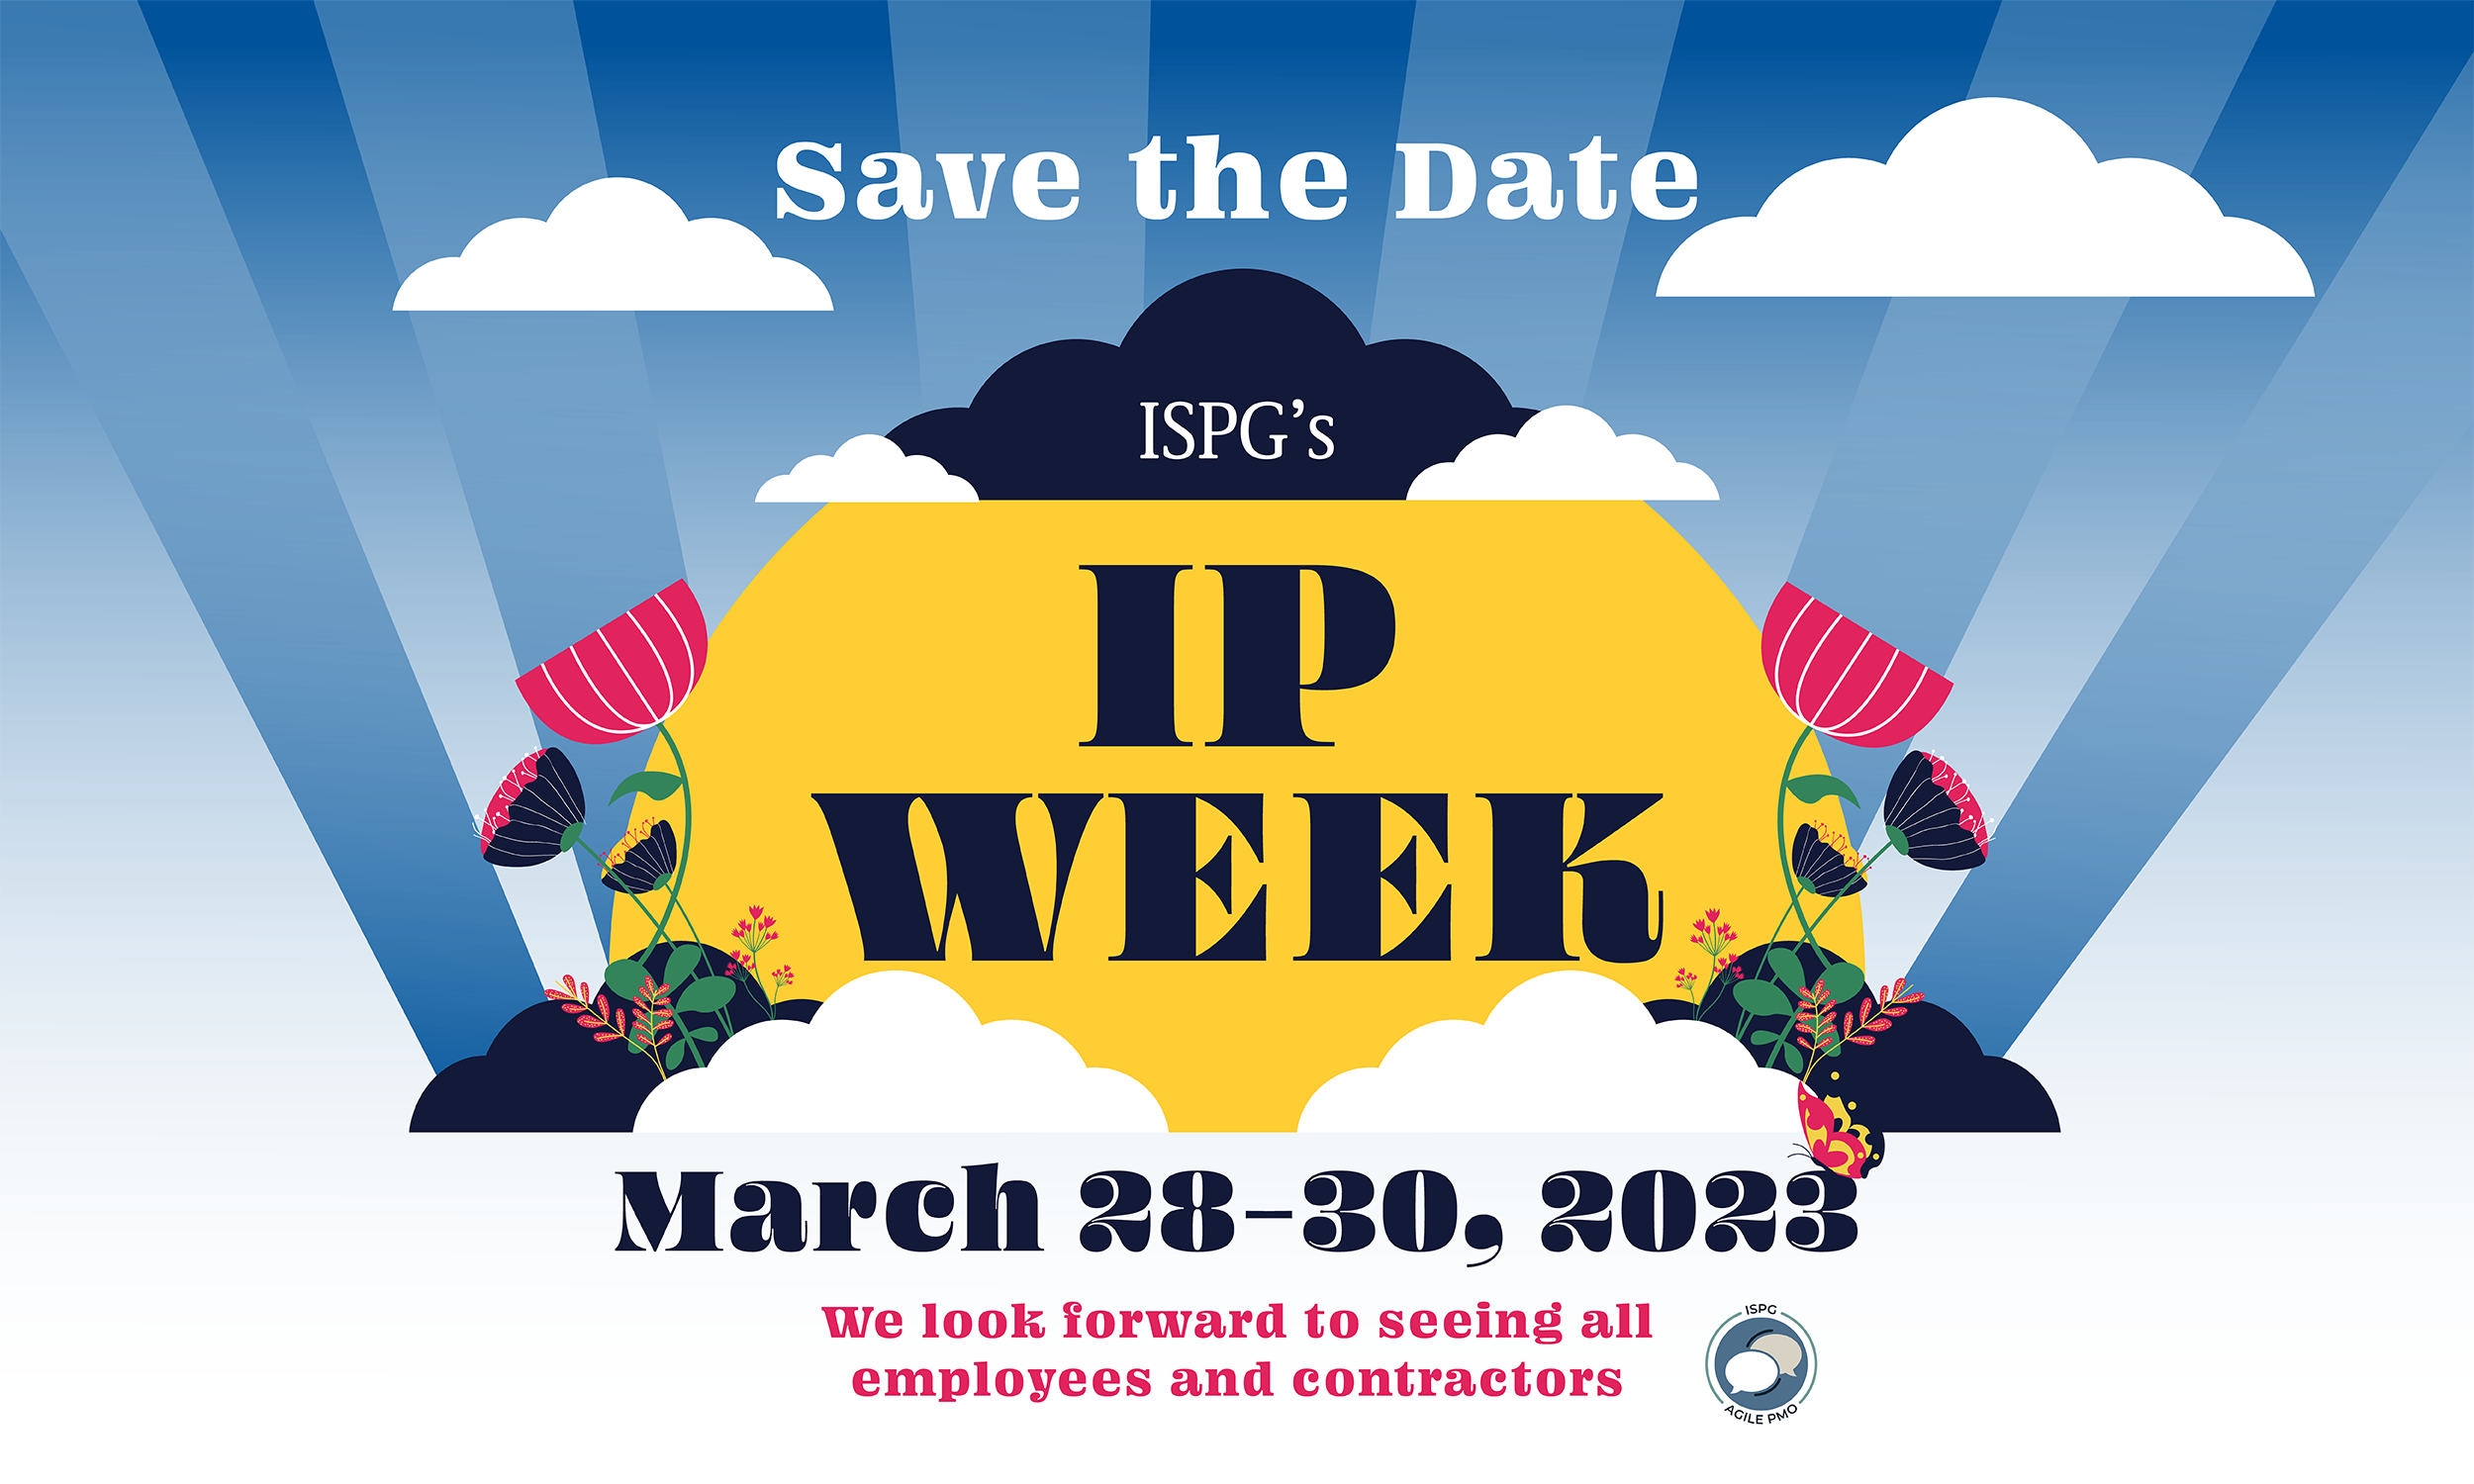 Save the Date graphic for ISPG's IP Week occurring March 28-30, 2023